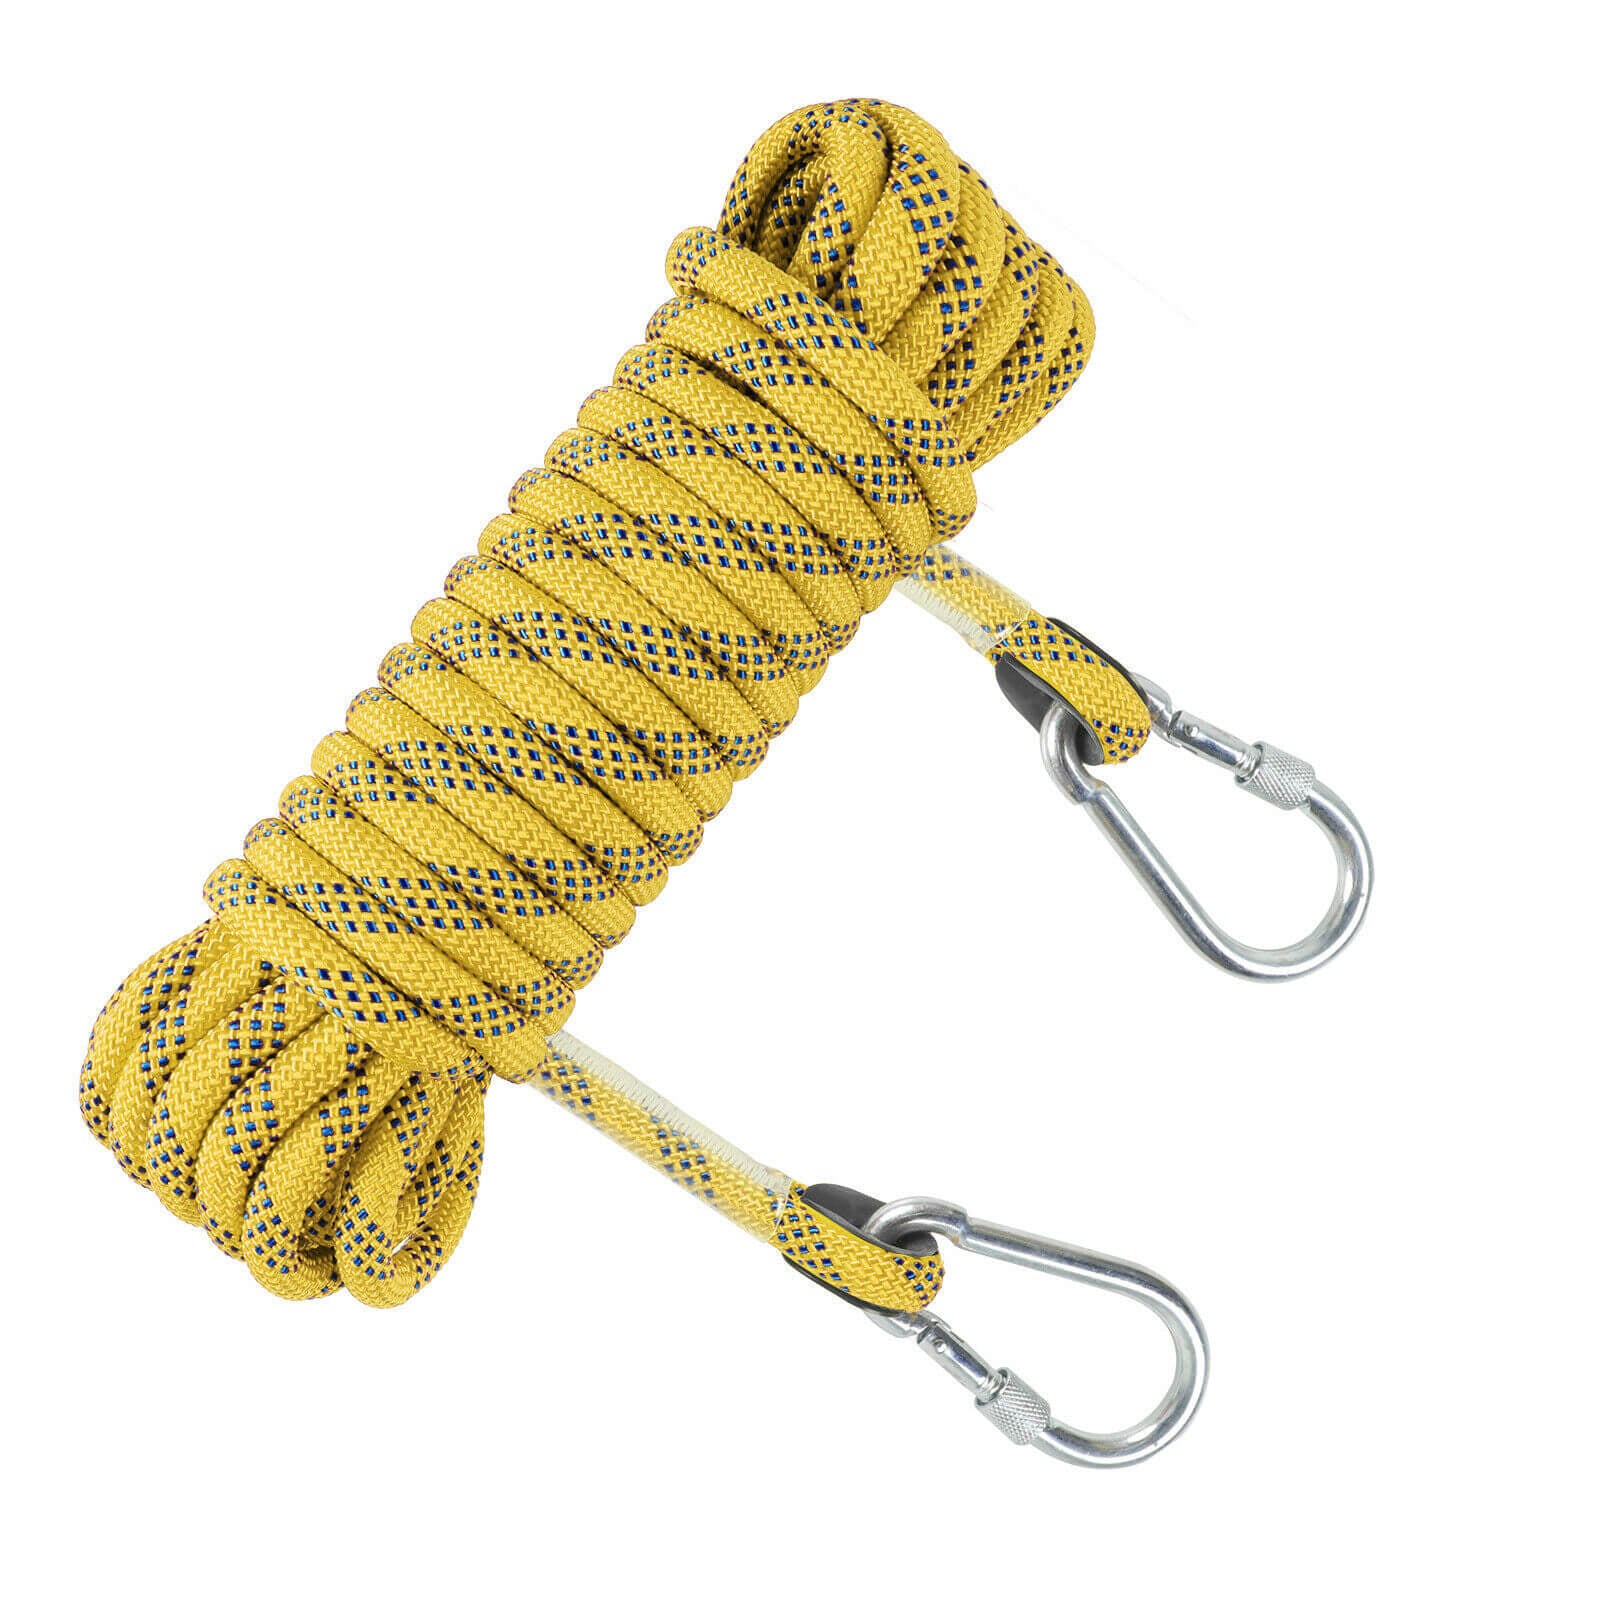 10mm Climbing Rope Outdoor Static Rock Climbing Rope, Escape Rope, Ice  Climbing Equipment, Fire Safety Rescue Rope 10M(32ft) 20M(64ft) 30M(96ft)